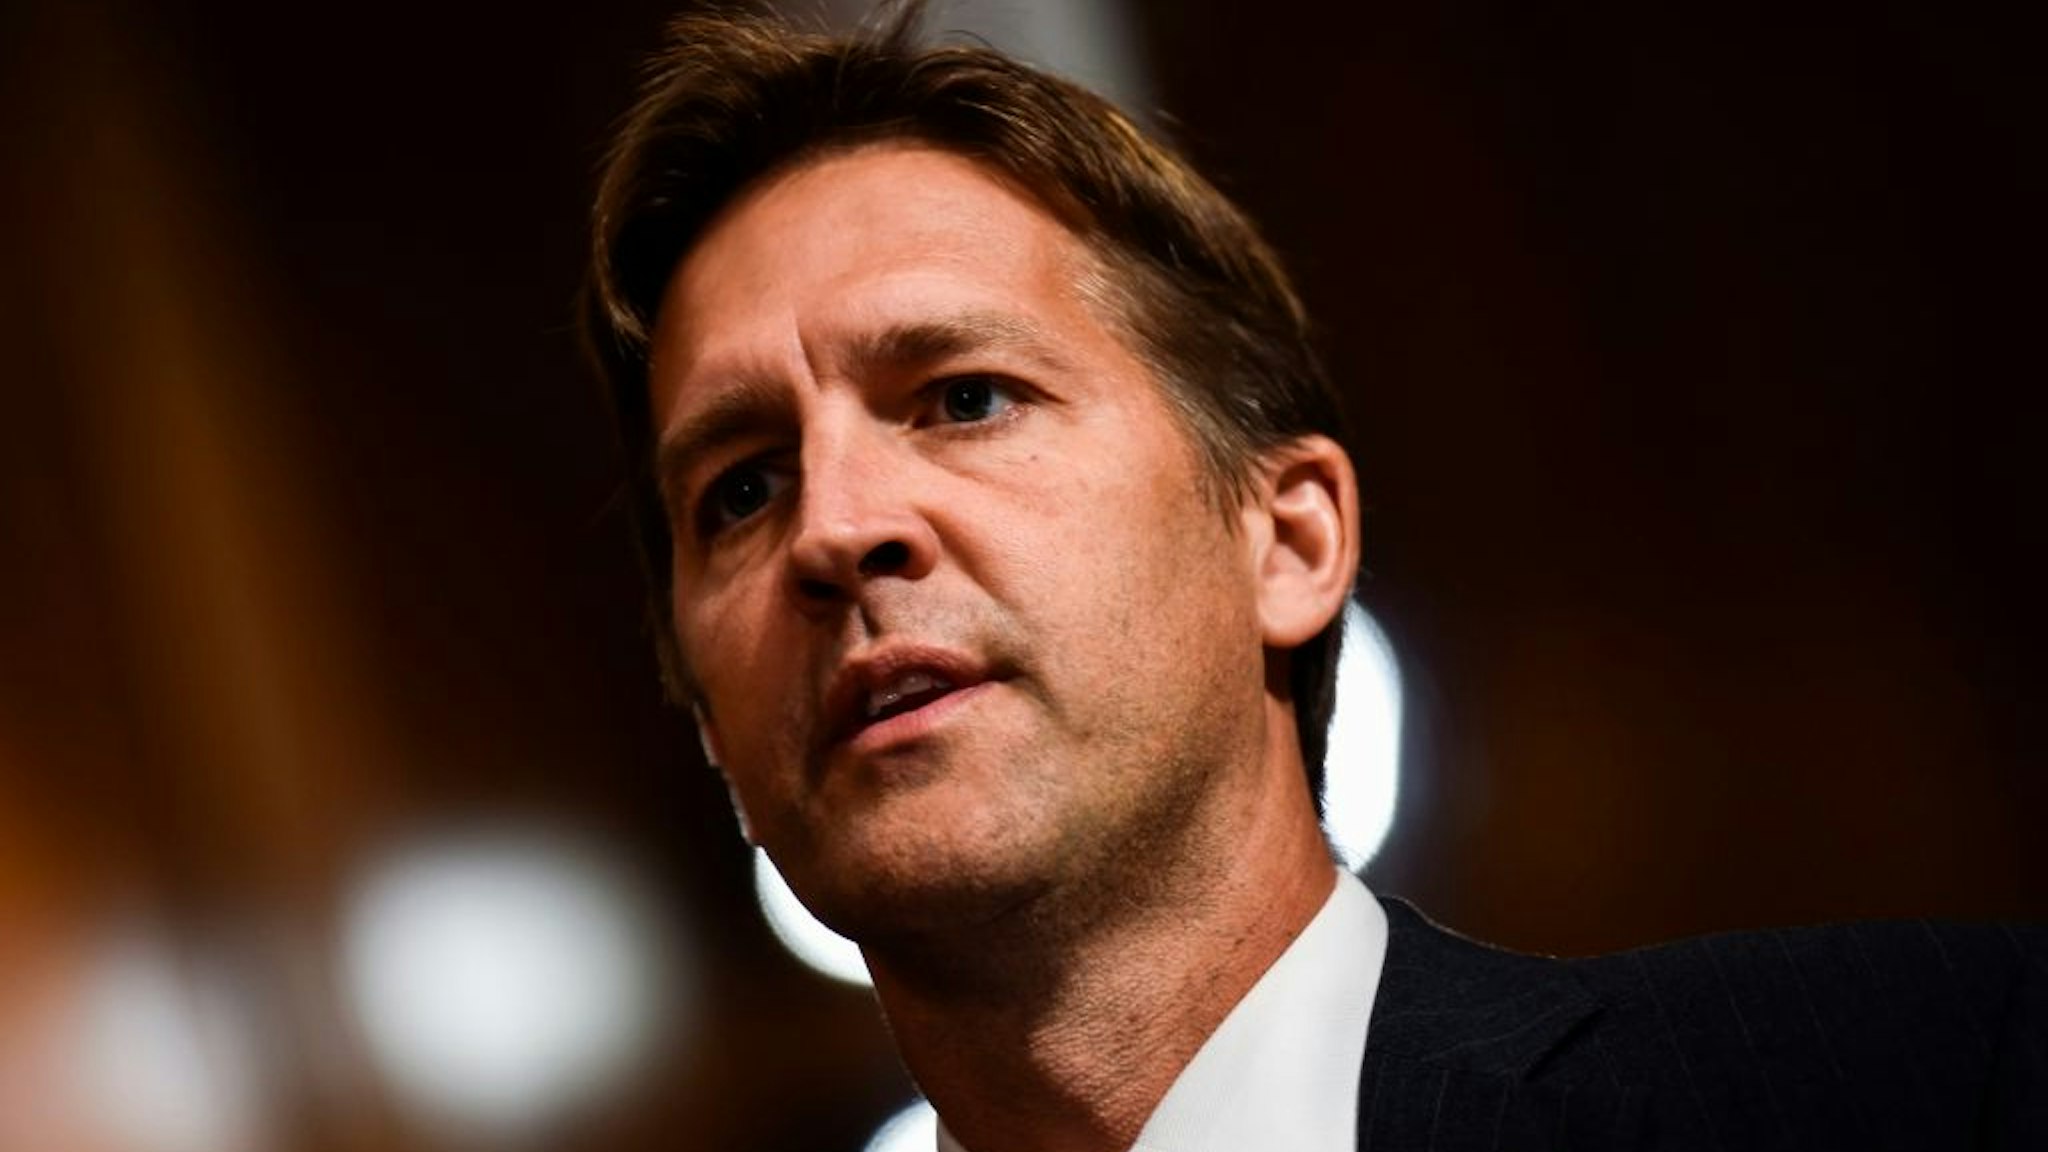 Senate Judiciary Committee member Senator Ben Sasse (R-NE) looks on during a markup hearing on Capitol Hill in Washington, DC on September 28, 2018, on the nomination of Brett M. Kavanaugh to be an associate justice of the Supreme Court of the United States.